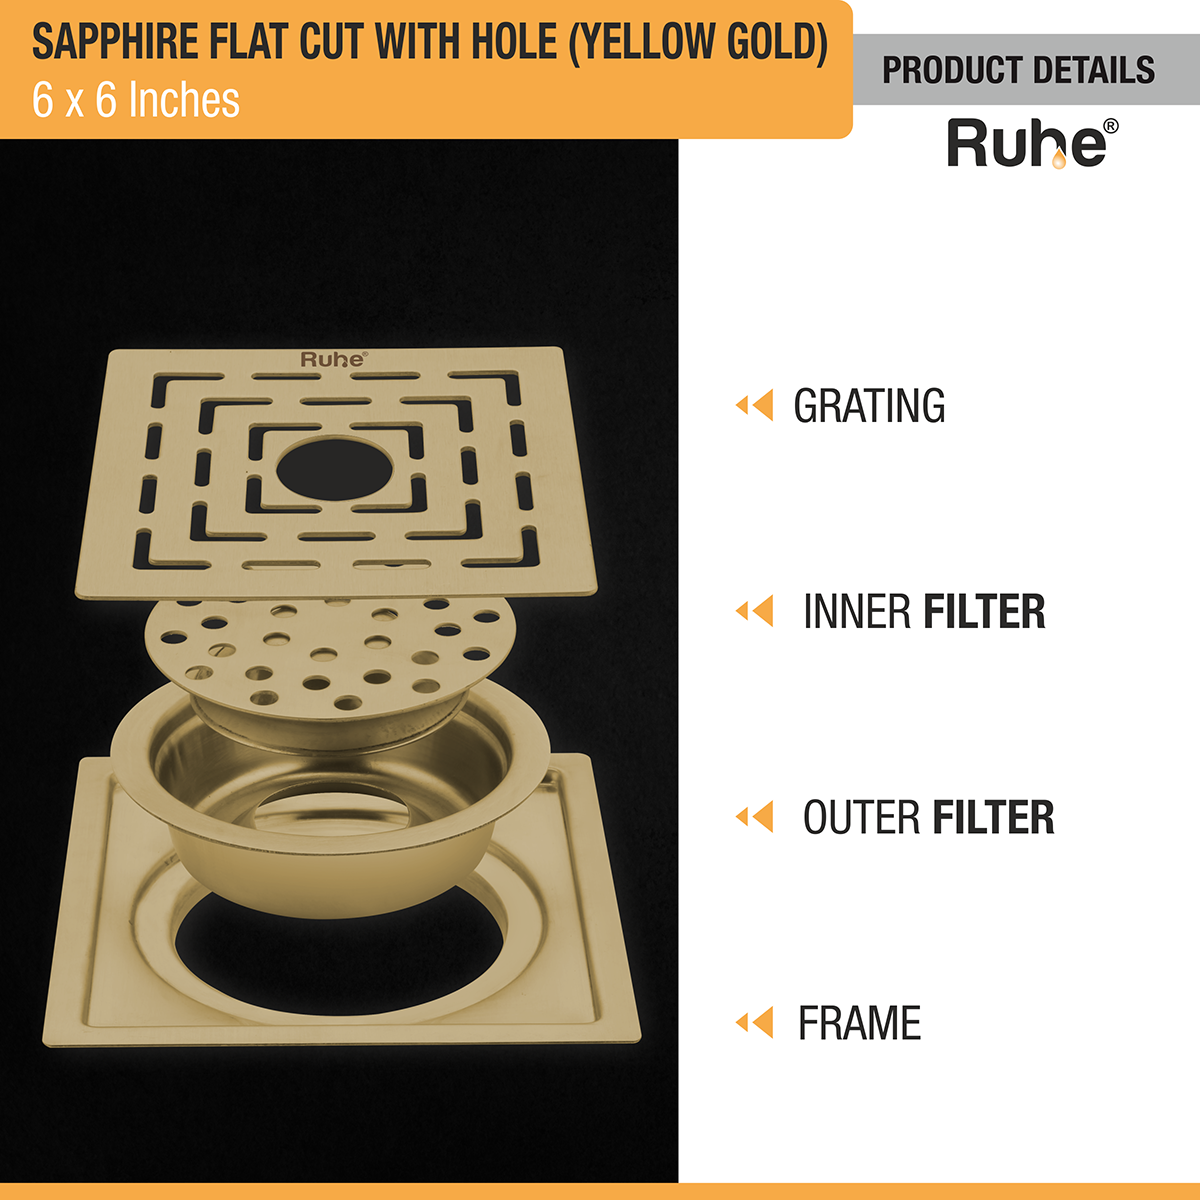 Sapphire Square Flat Cut Floor Drain in Yellow Gold PVD Coating (6 x 6 Inches) with Hole product details